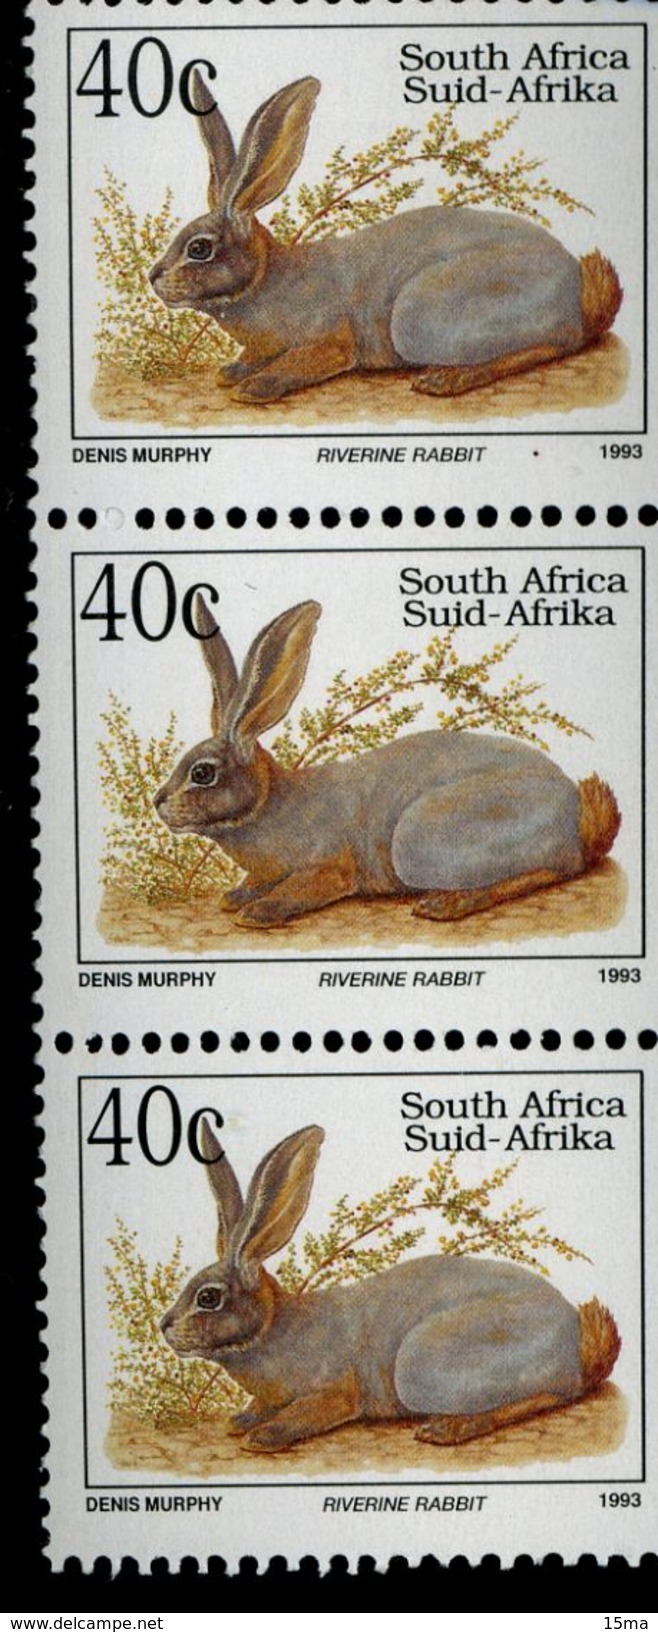 South Africa Riverine Rabbit SG809 1993 40c 3 Timbres Neufs - Neufs